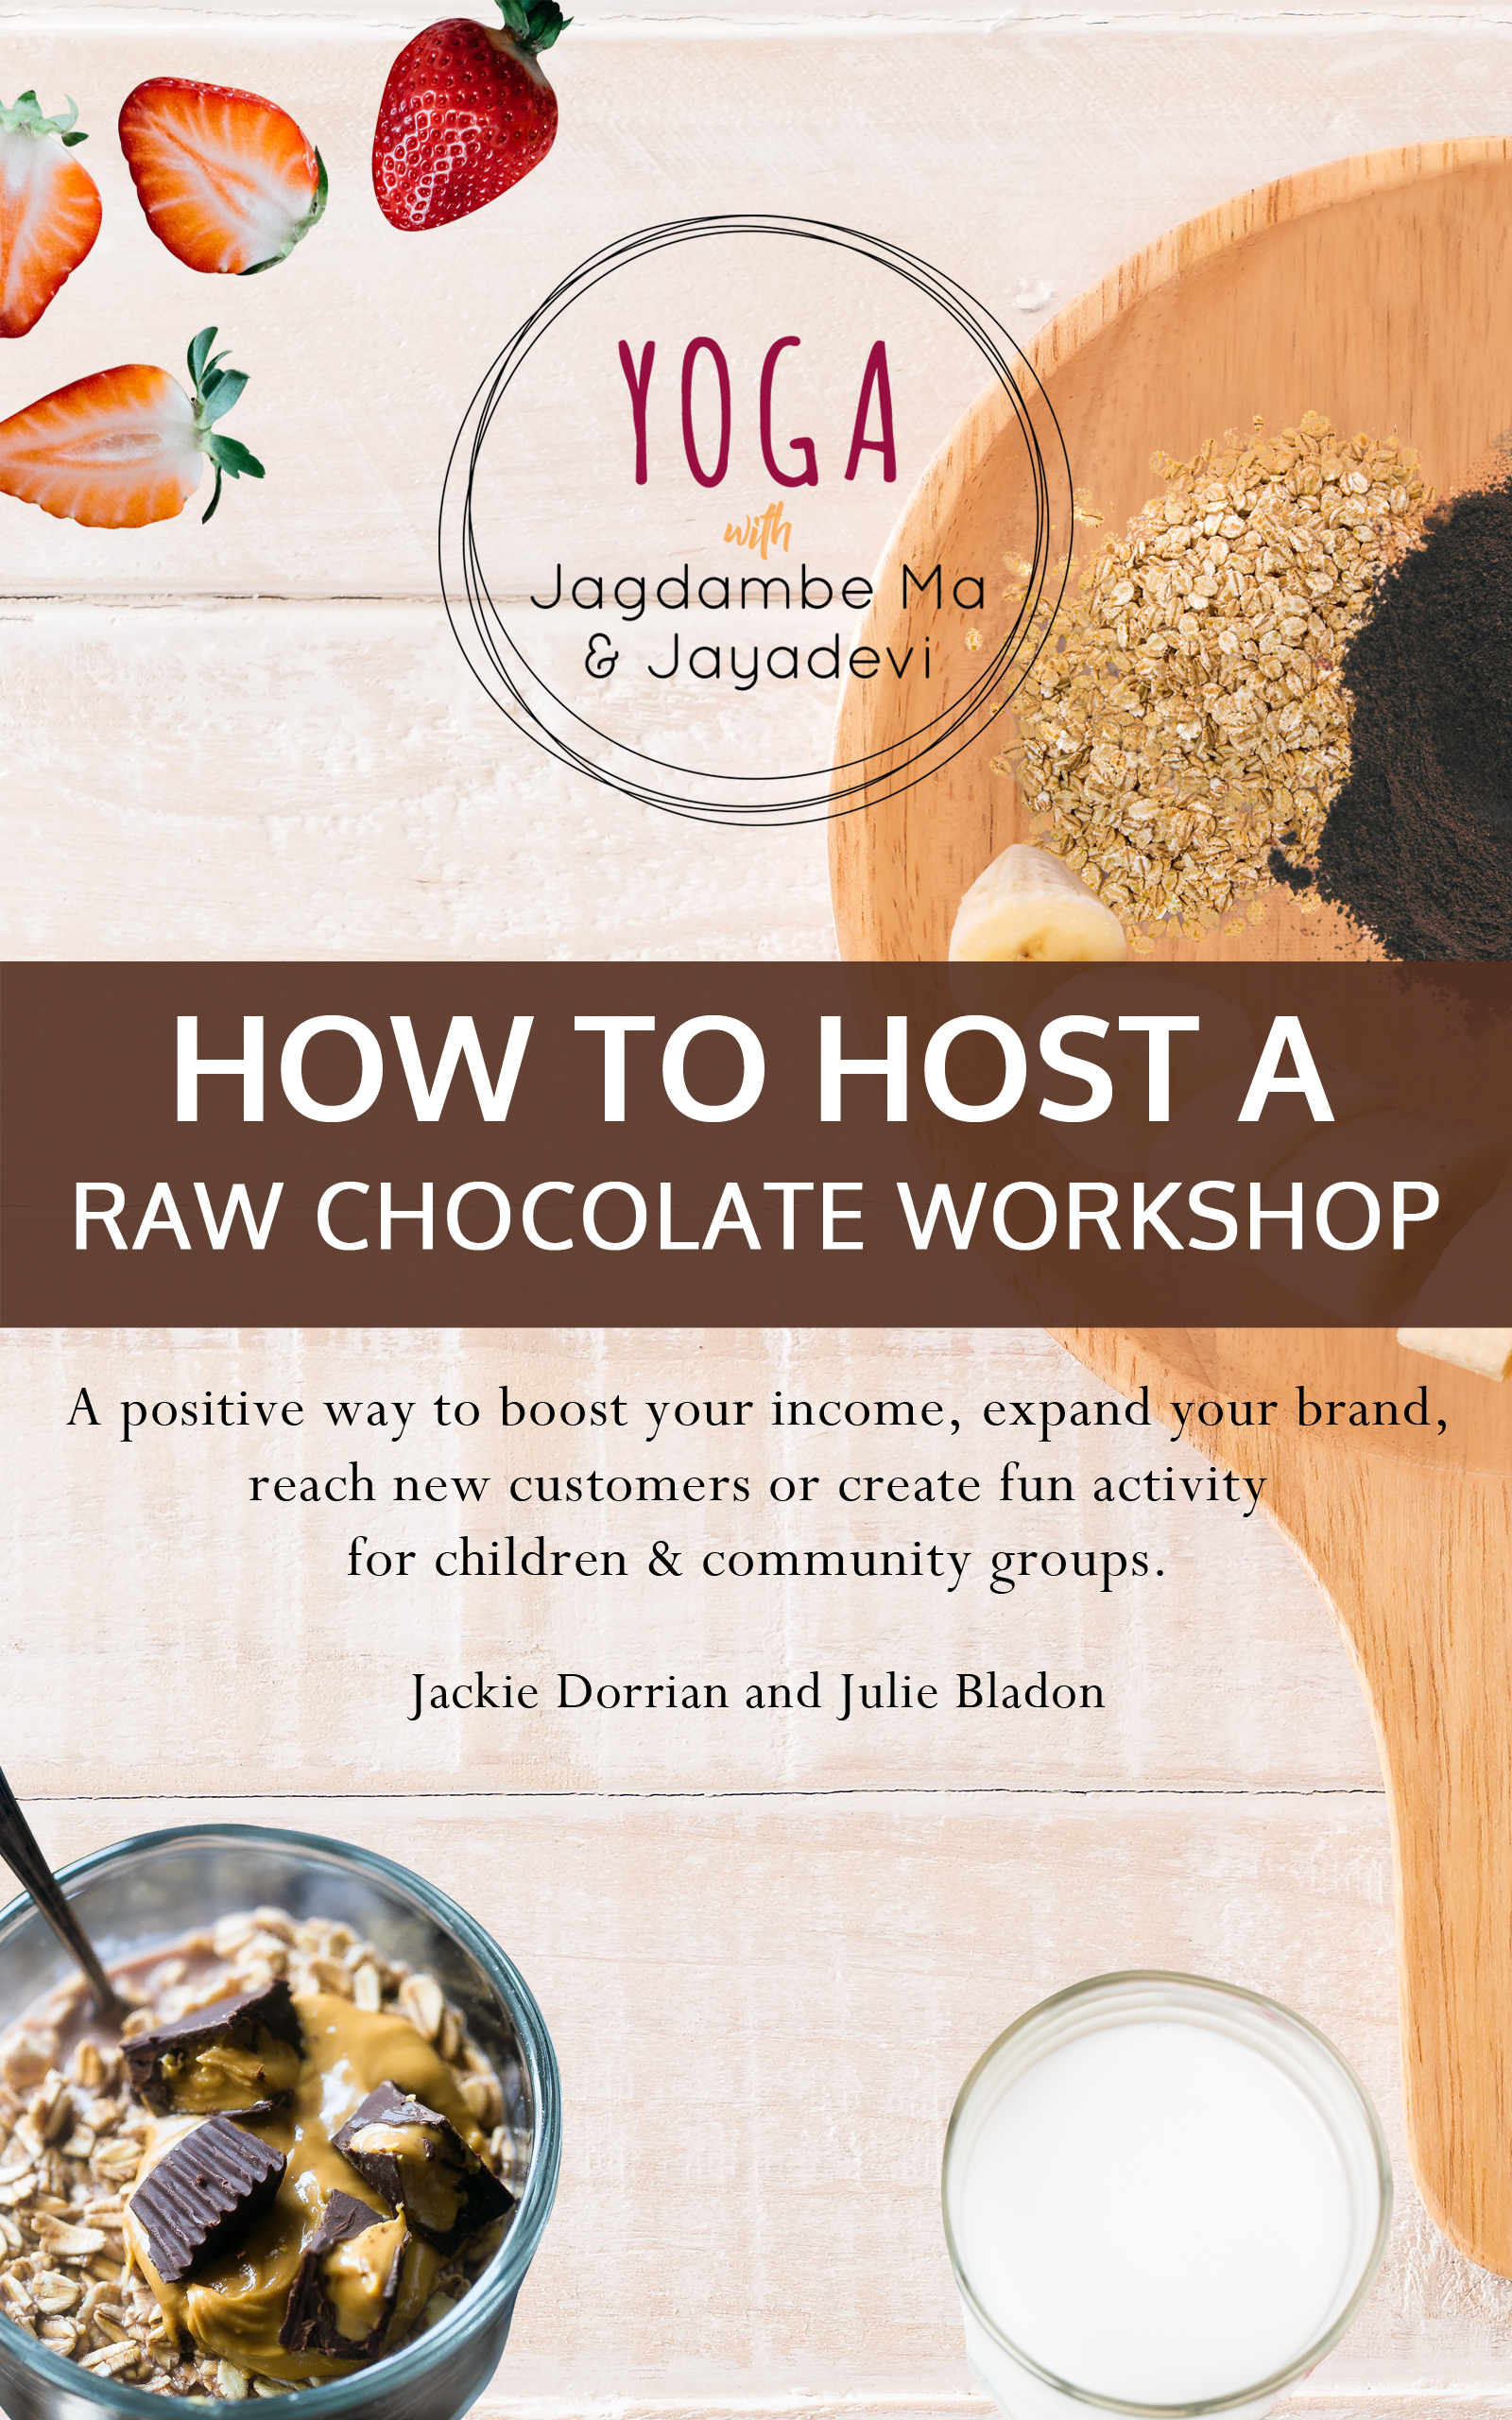 How to host a raw chocolate workshop